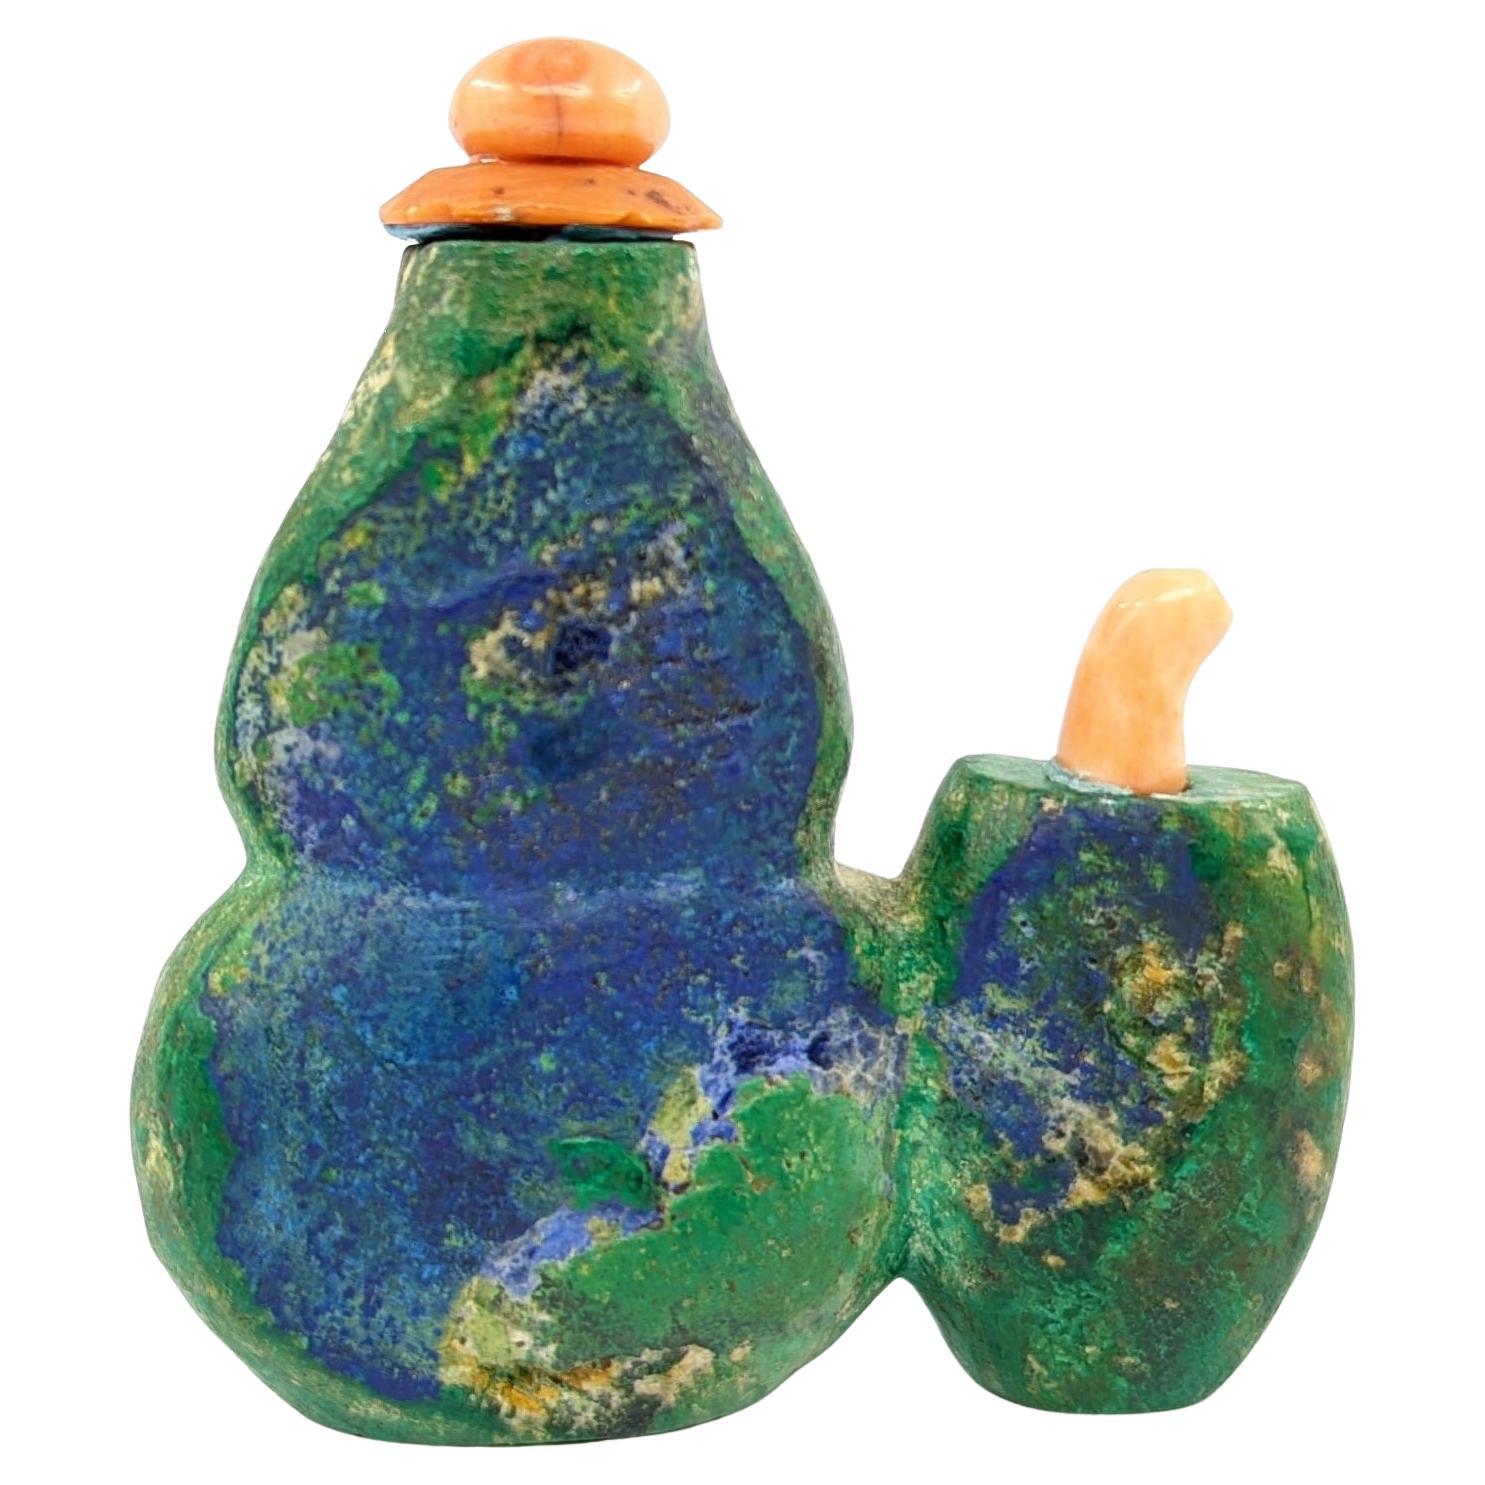 Discover a piece of history with this 19th-century double snuff bottle, hand carved from the captivating azurite malachite stone, renowned for its vibrant interplay of green and purplish-blue hues, a true spectacle of nature's artistry.

This snuff